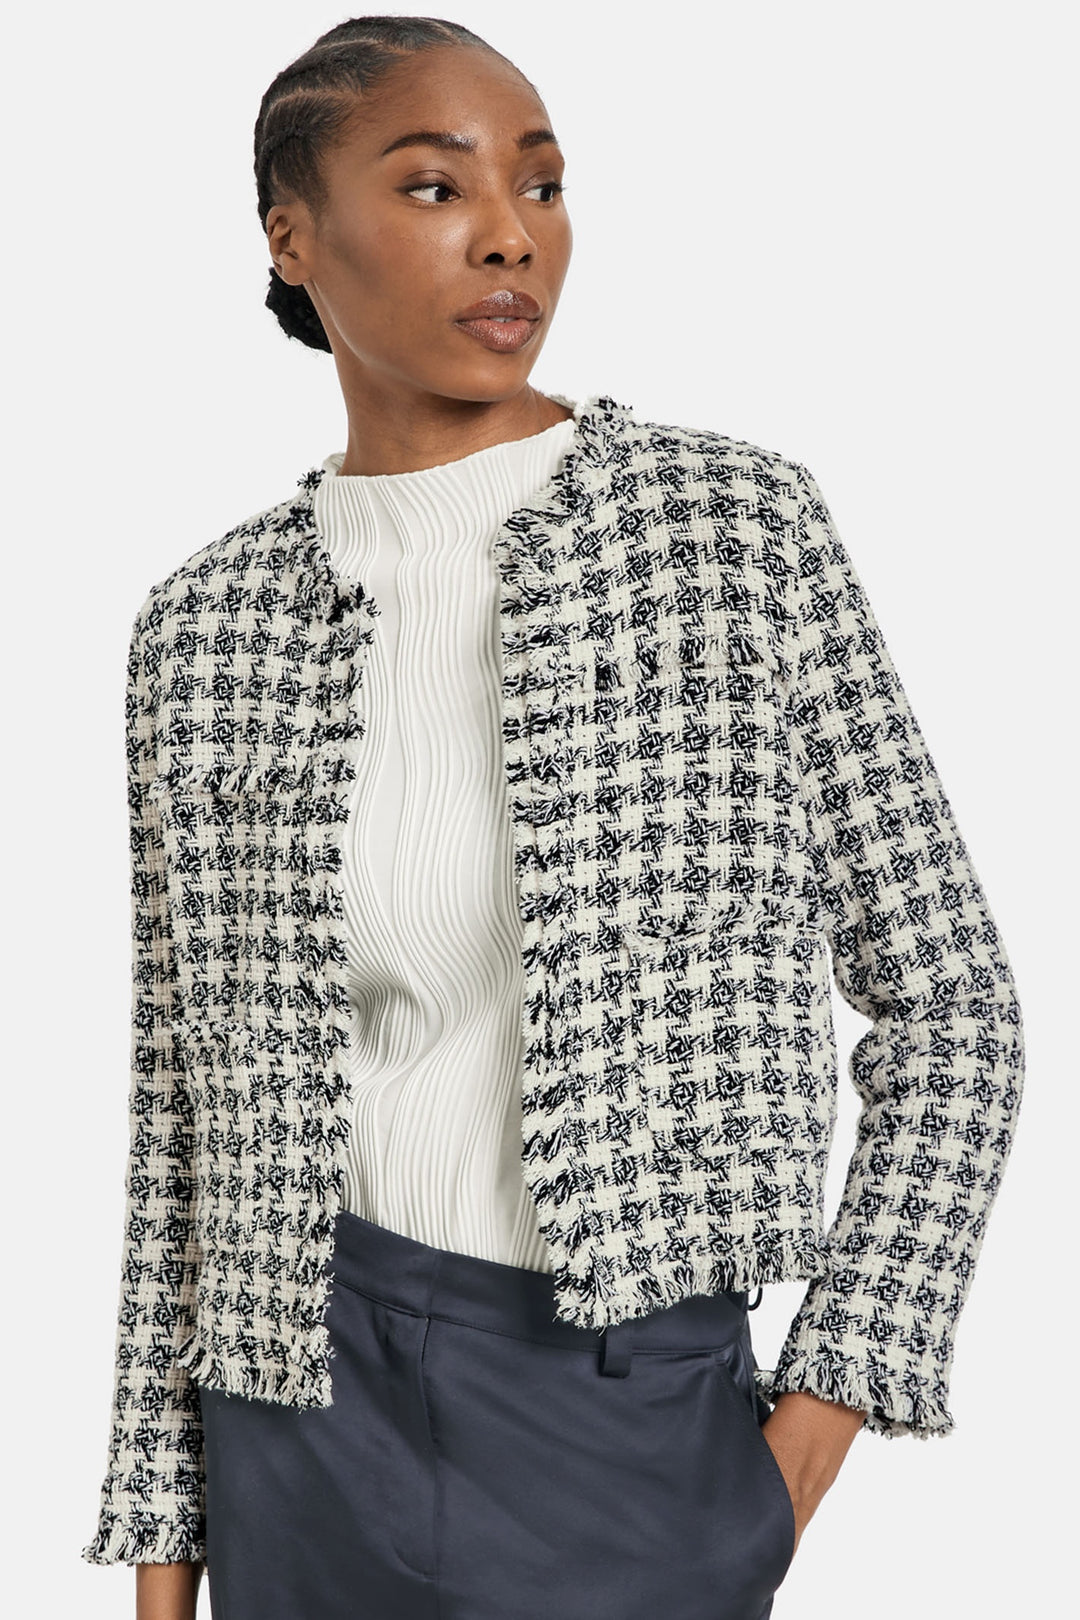 Gerry Weber 330002-31330 Cream Black Tweed Style Open Front Jacket - Dotique Chesterfield